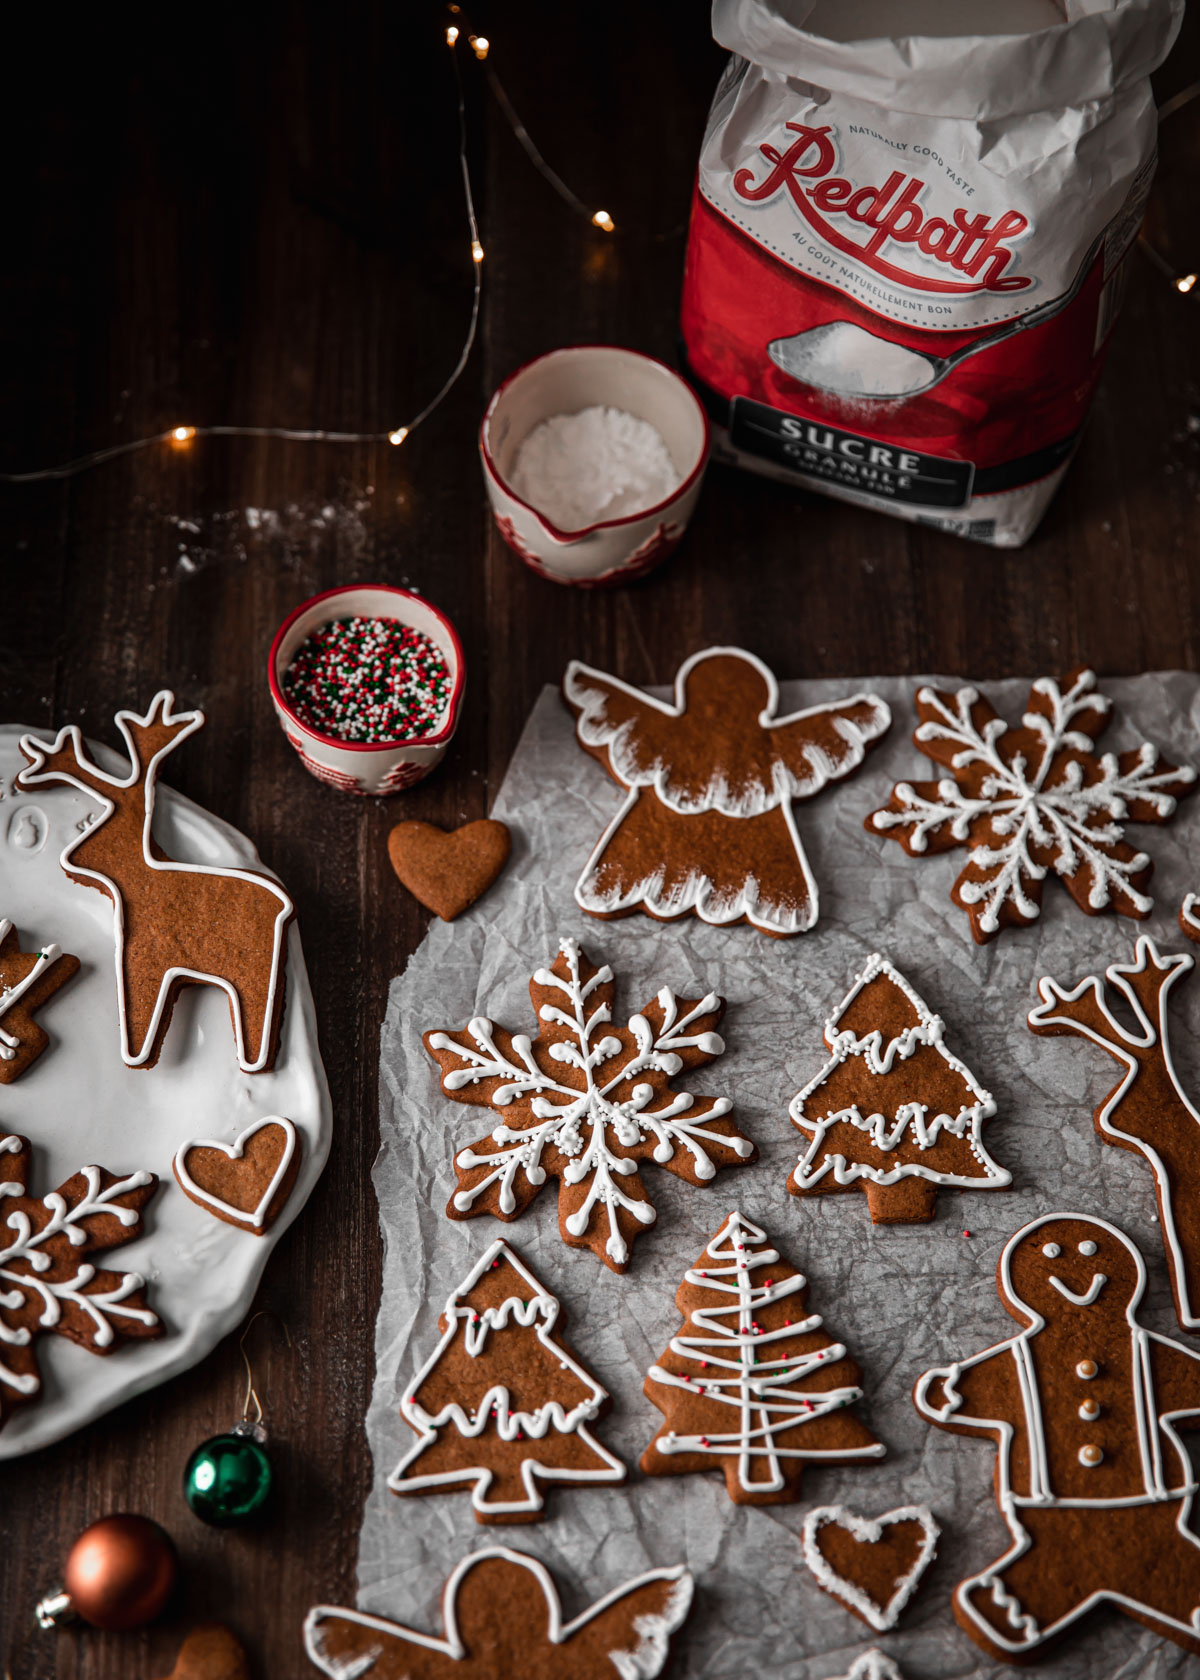 Gingerbread cookies with royal icing made with Redpath Sugar